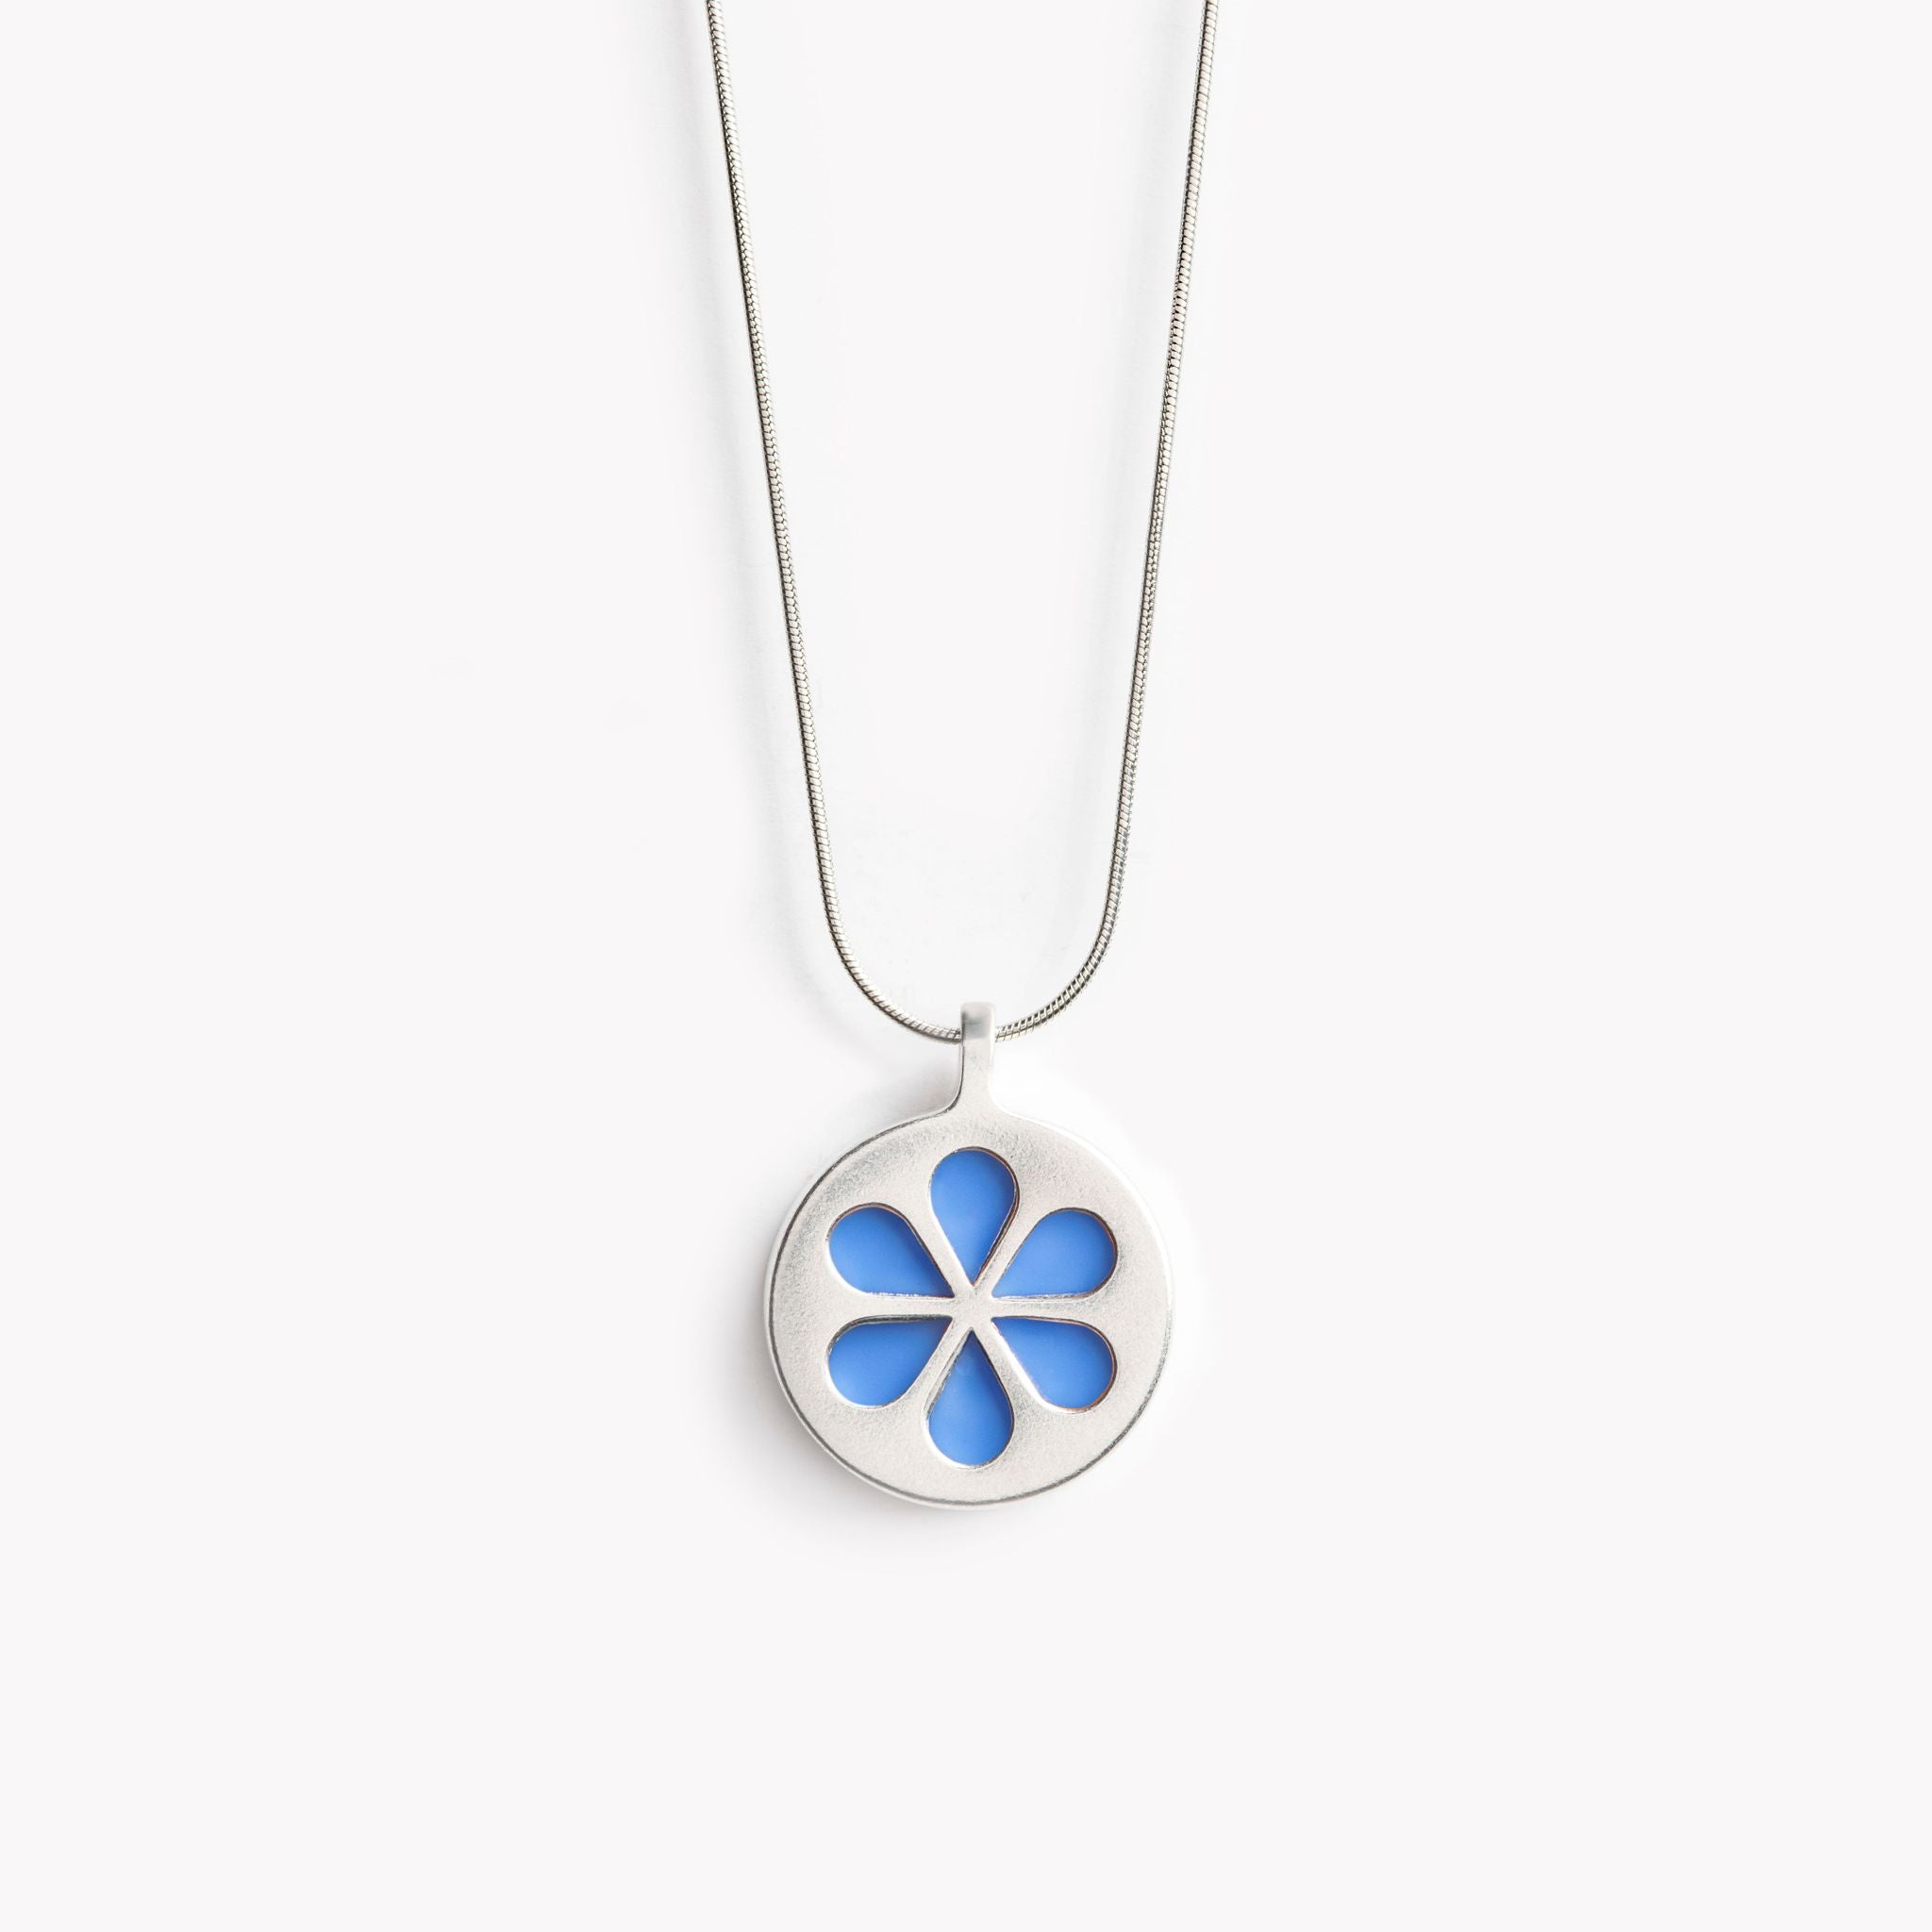 A simple circular pendant necklace with a bright blue flower petal design.